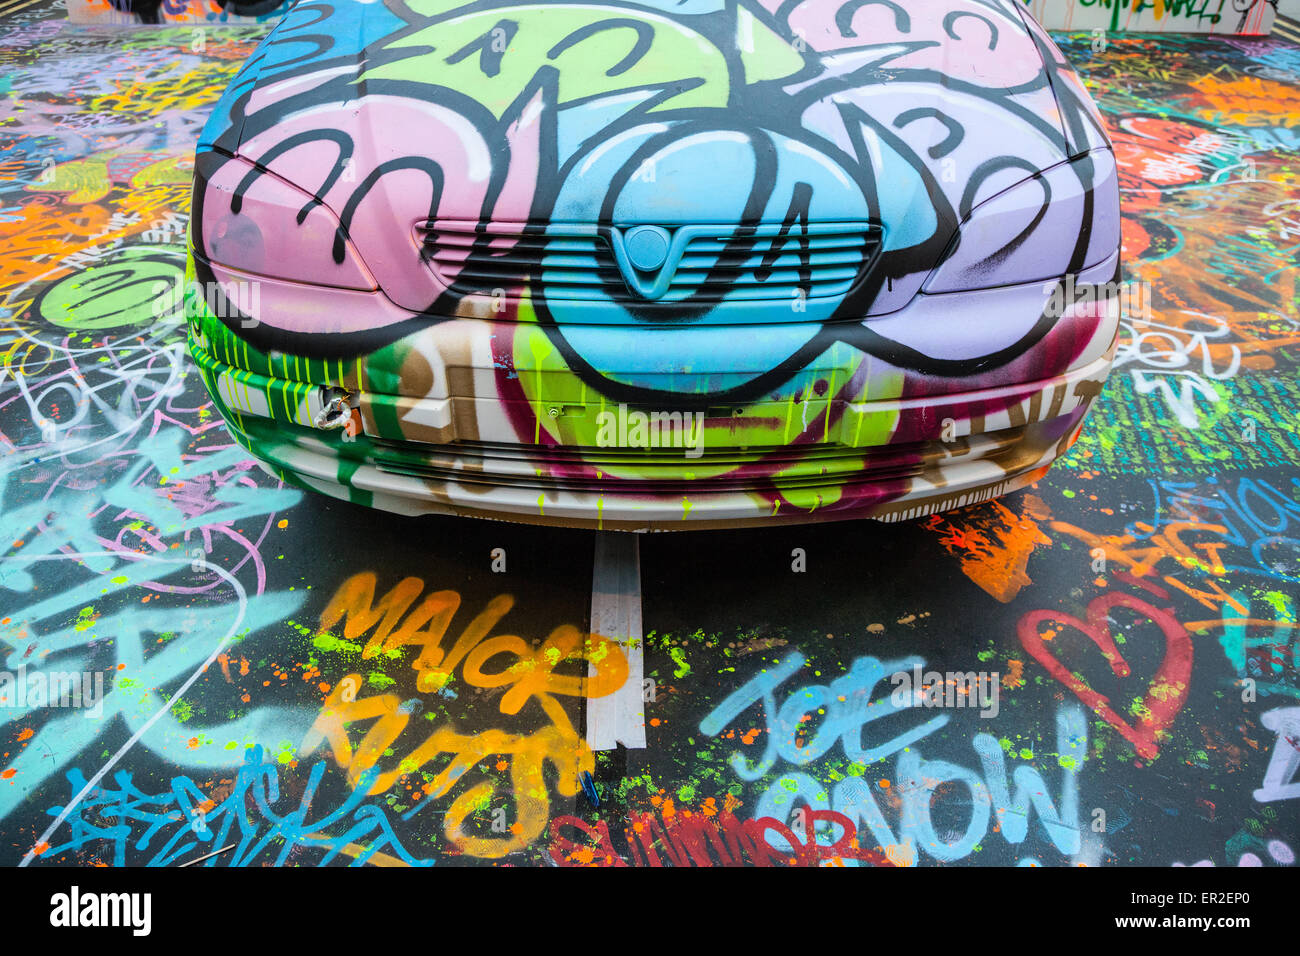 A Vauxhall Astra completely covered in graffiti as part of an exhibition at Leeds Trinity. Stock Photo